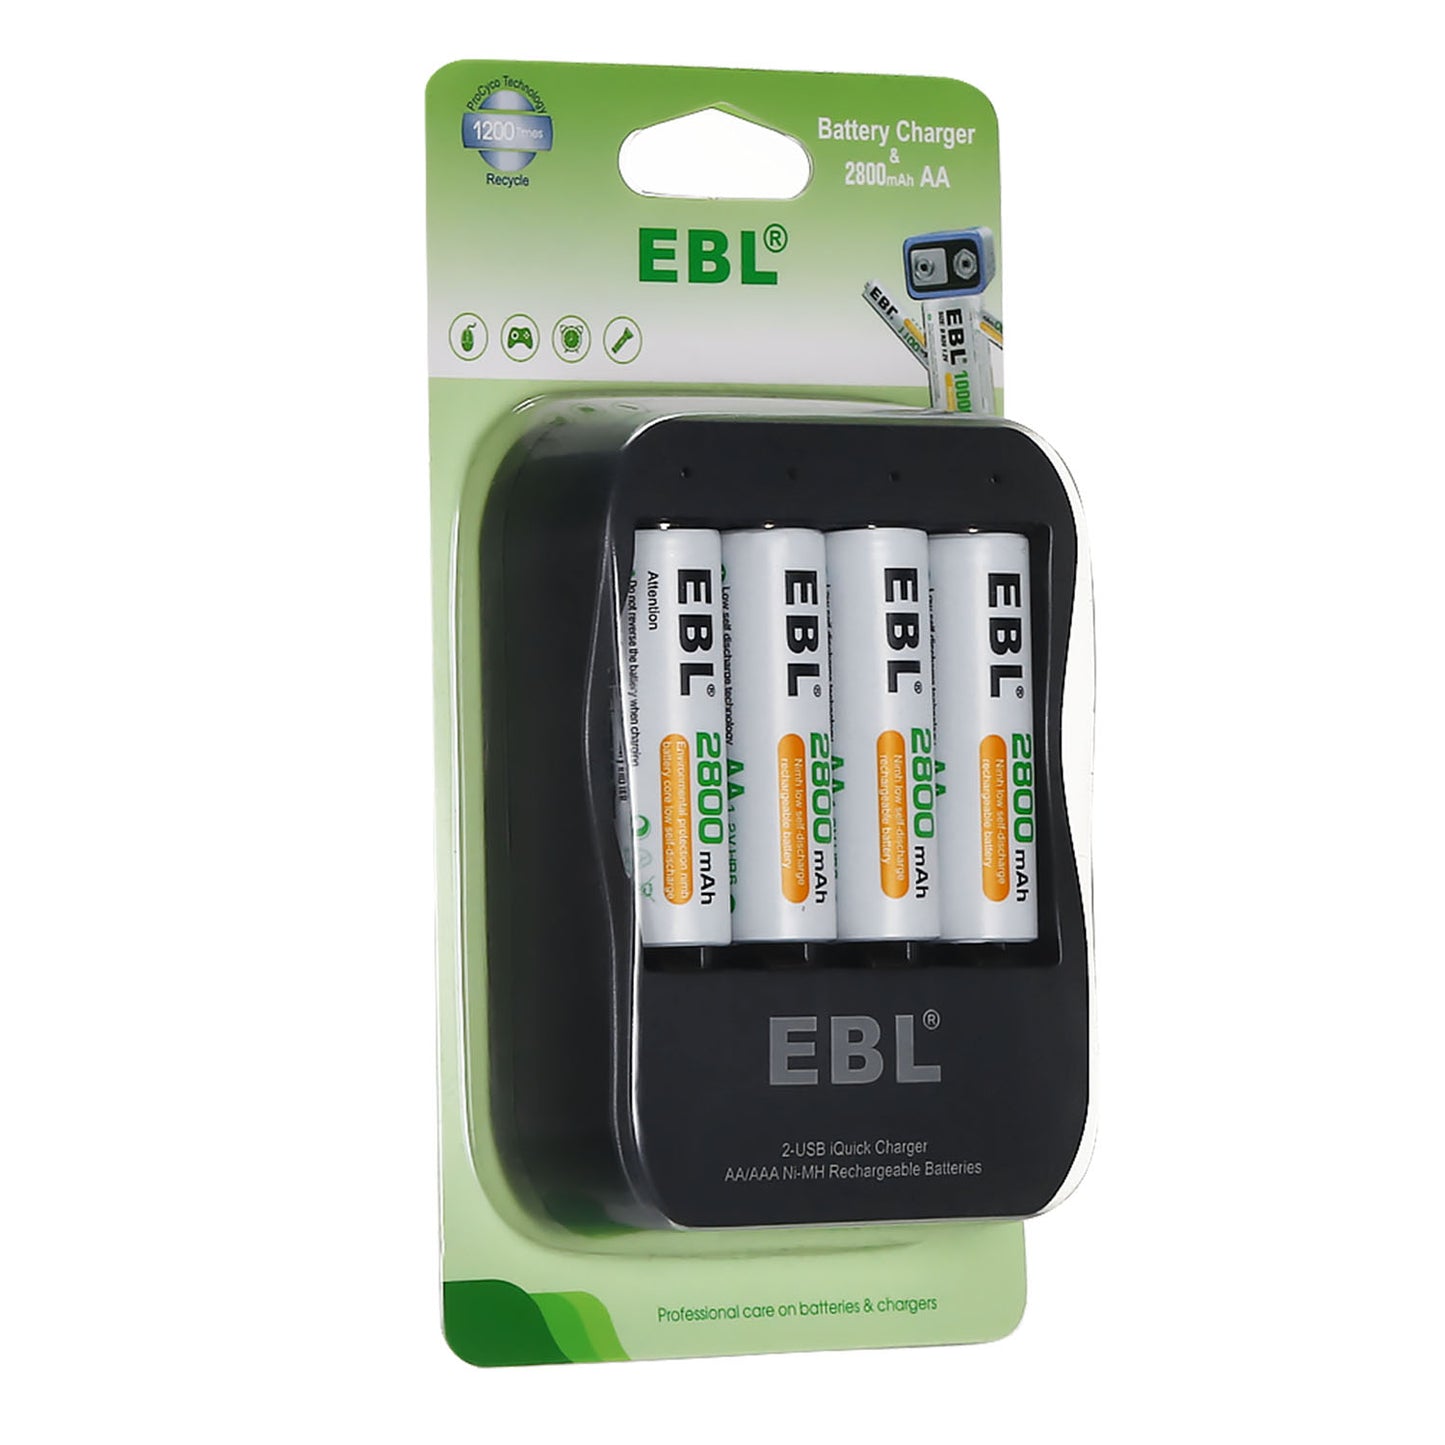 EBL EB-P62018112 1.2V AA 2800mAh NiMH Nickel Metal Hydride Rechargeable Batteries (Pack of 4) with Fast Charging AA/AAA 2-Hour USB-C / Micro USB Quick Battery Charger